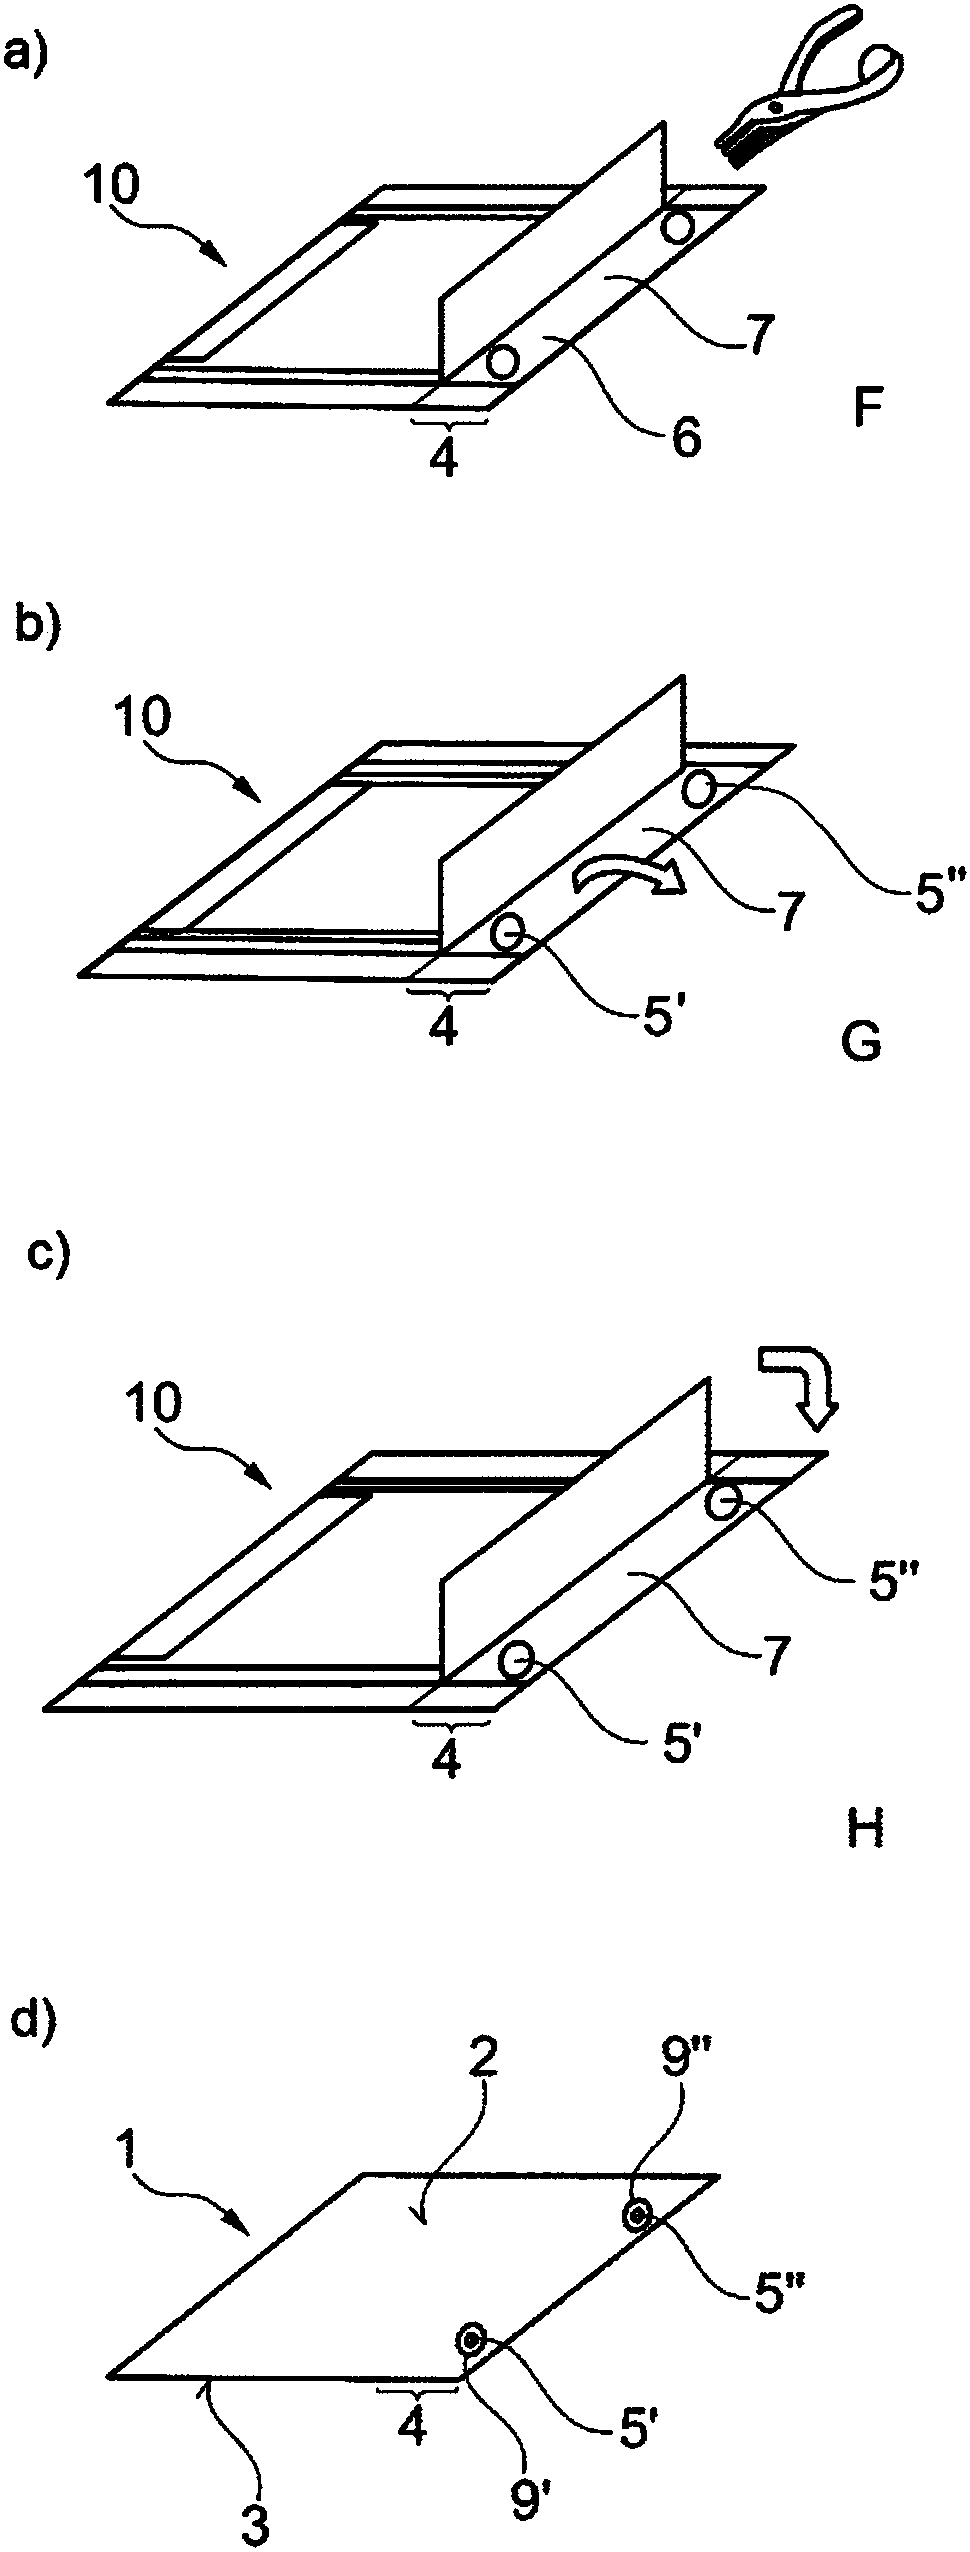 Method for producing a functional module